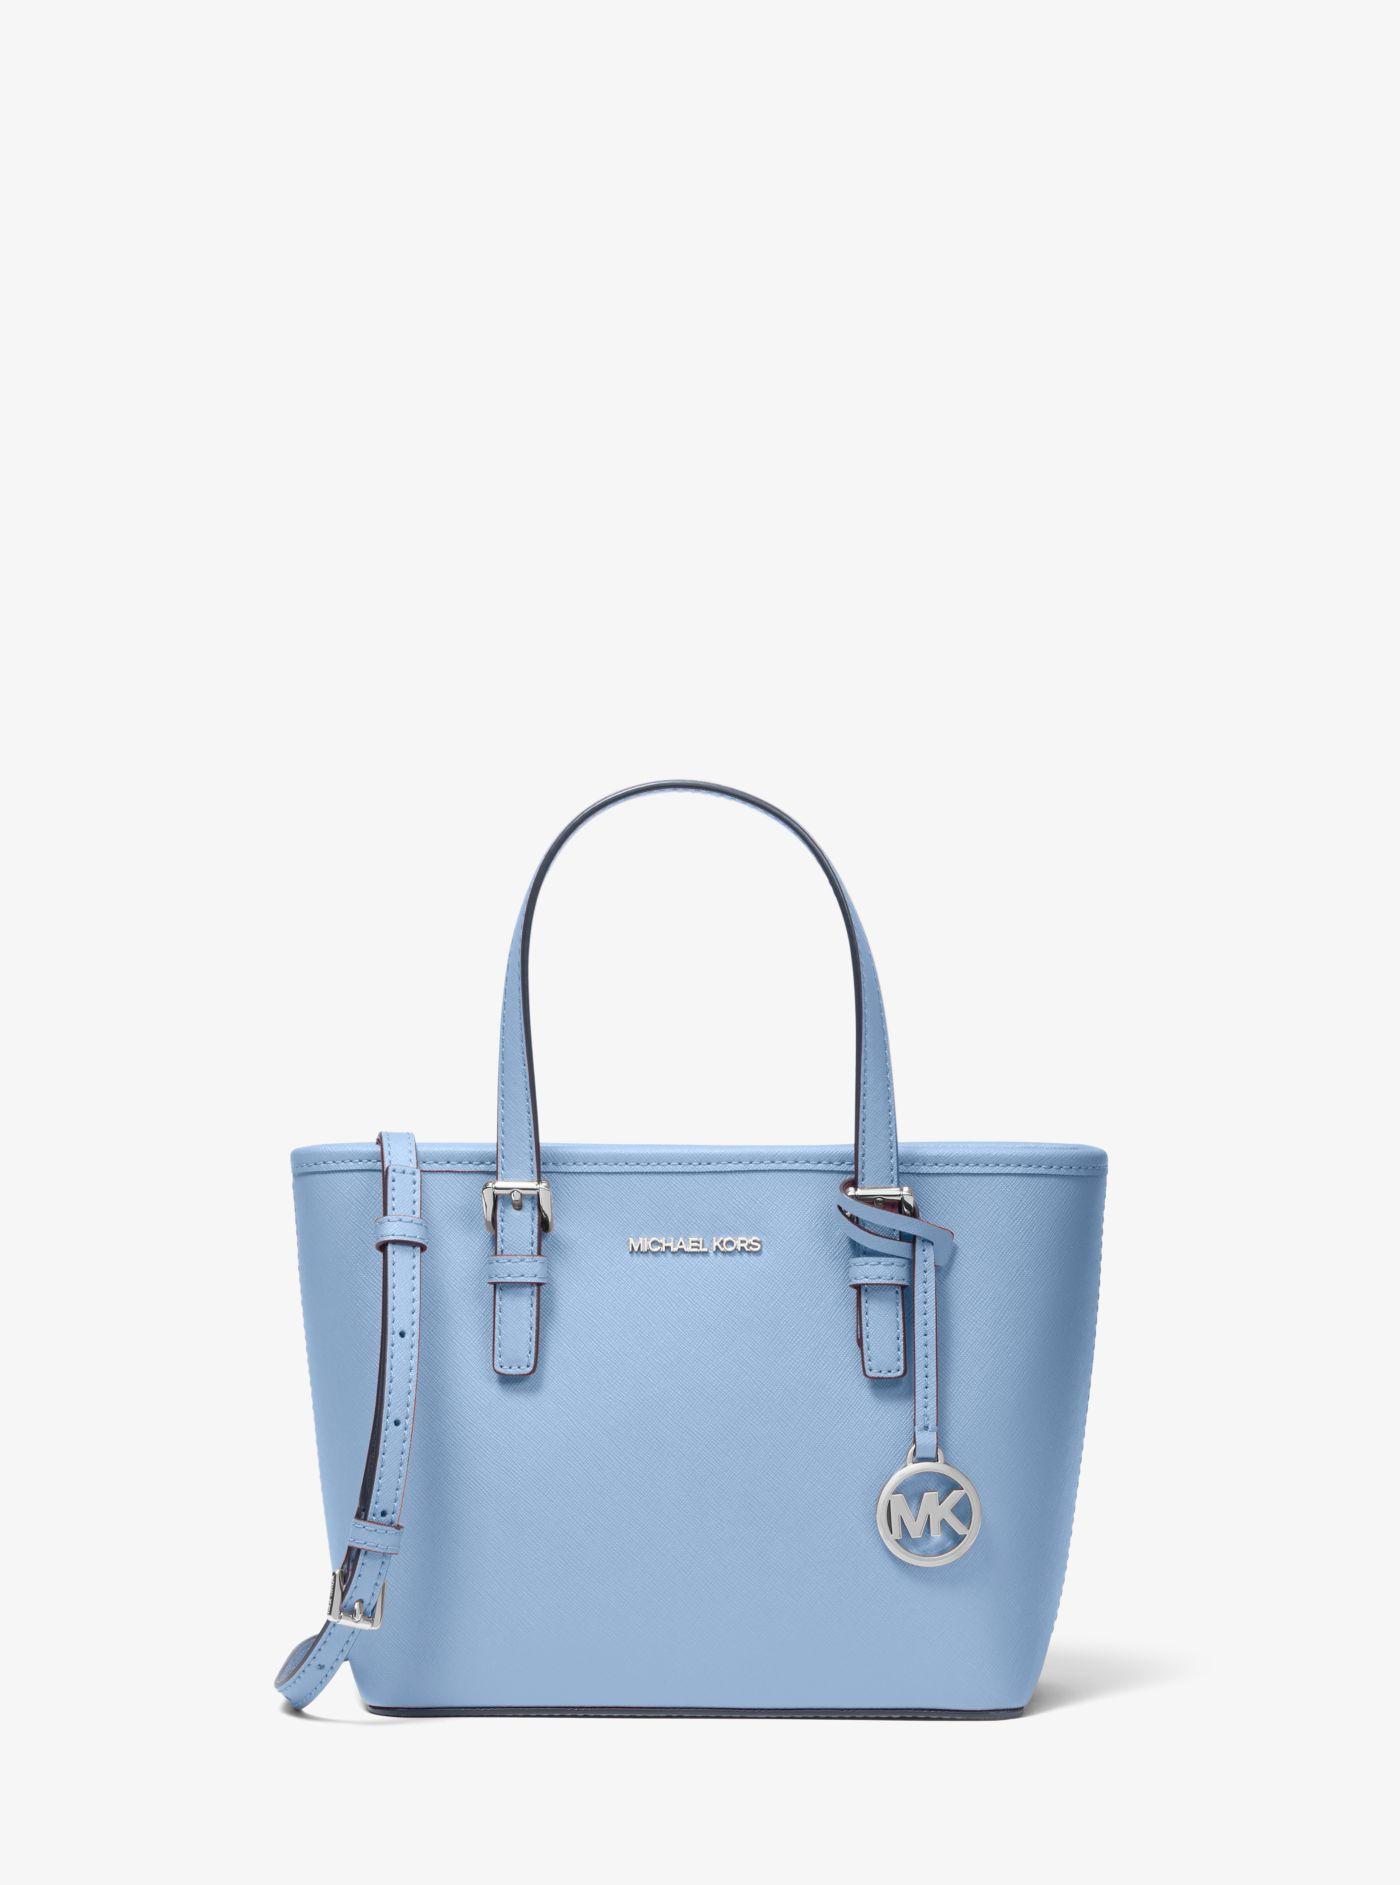 Michael Kors Jet Set Travel Extra-small Saffiano Leather Top-zip Tote Bag  in Light Sky (Blue) | Lyst